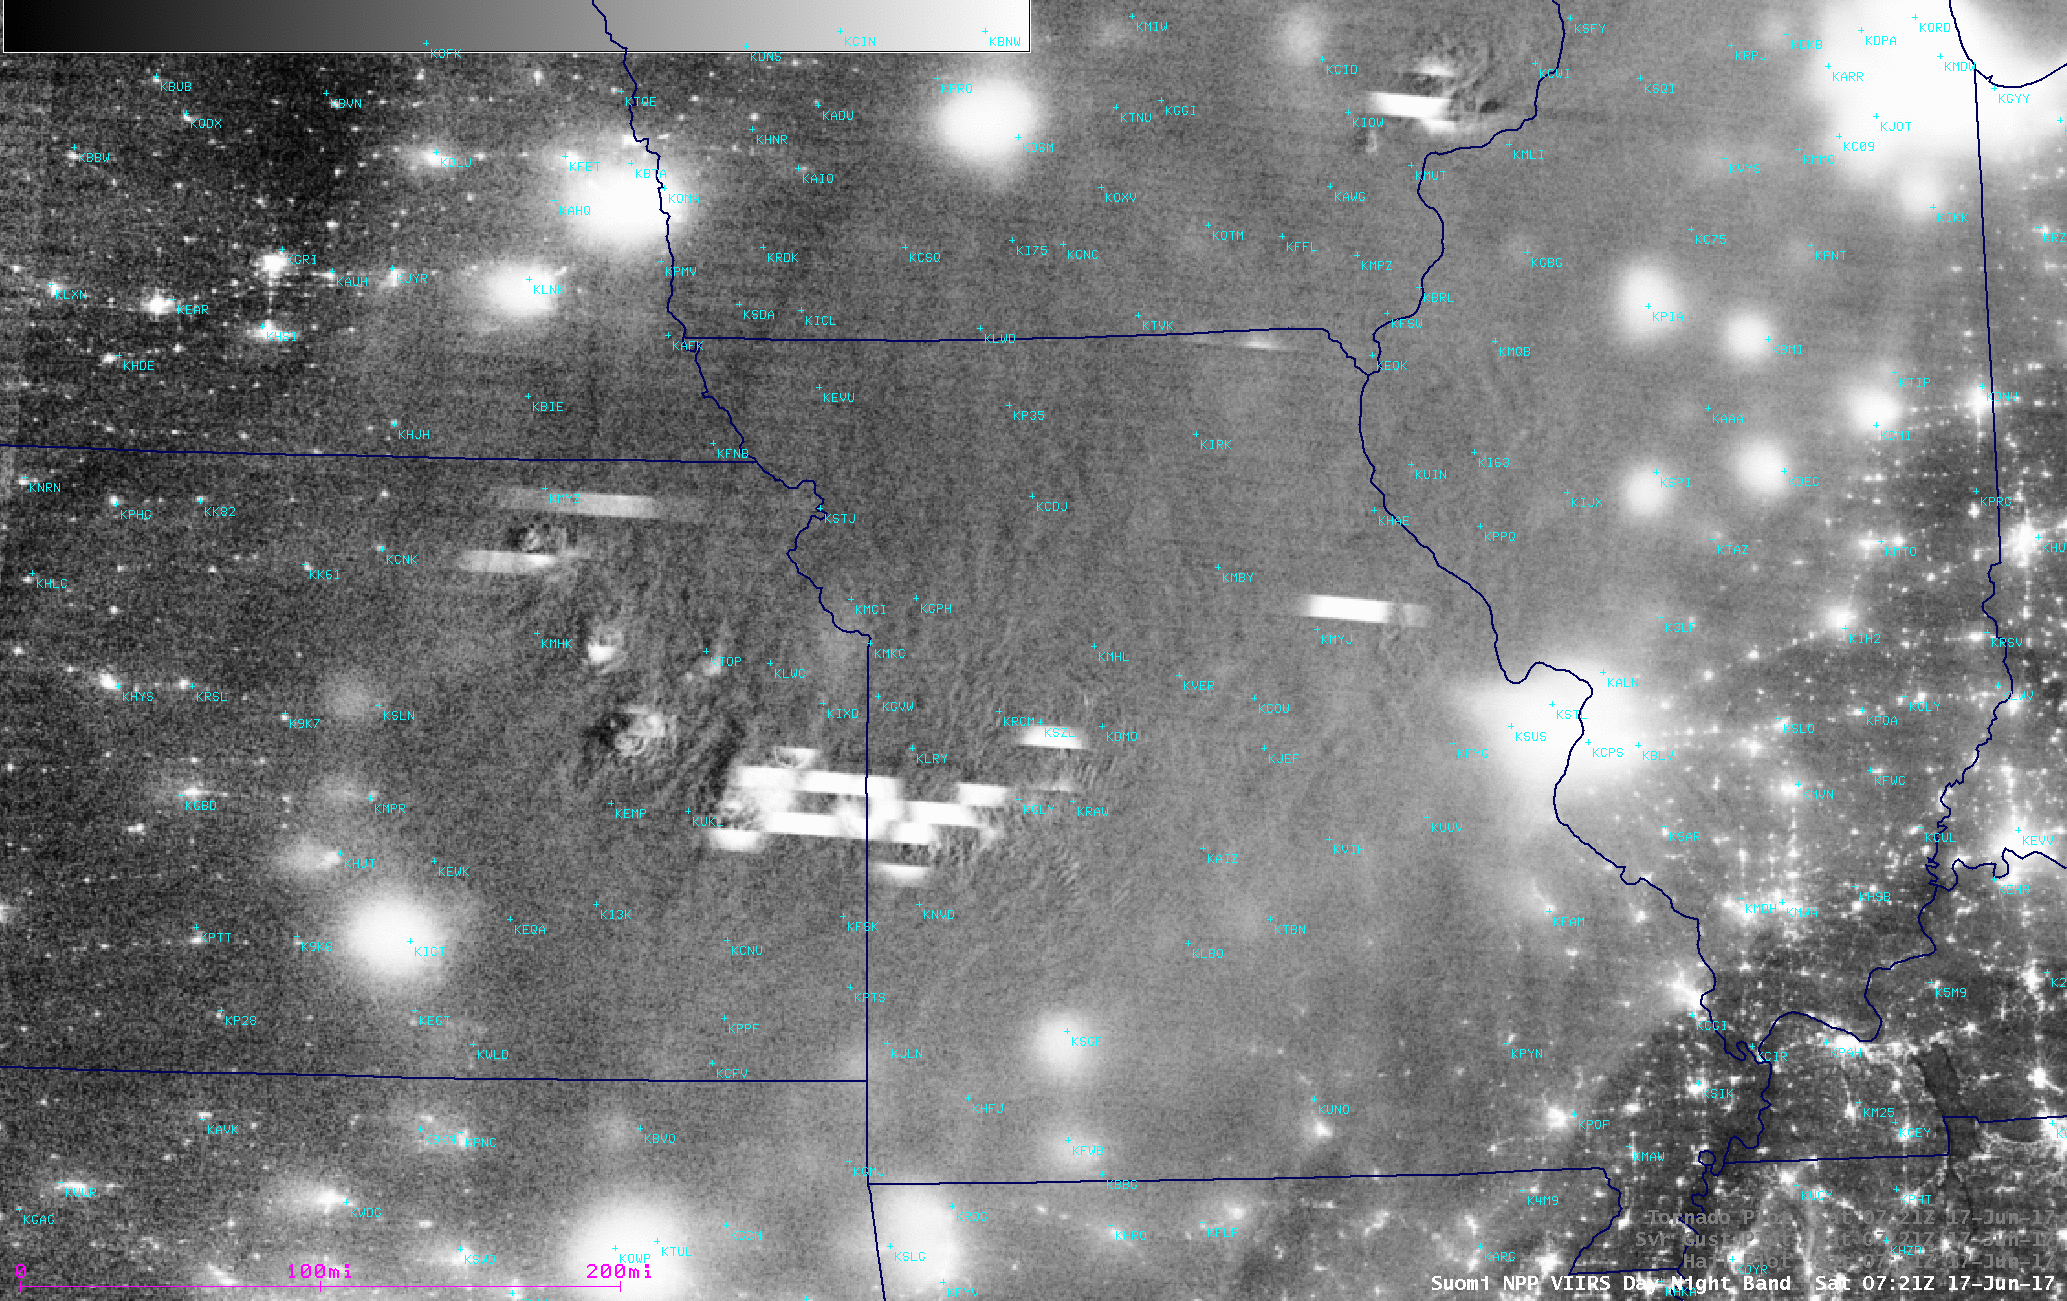 Suomi NPP VIIRS Day/Night Band (0.7 µm) and Infrared Window (11..45 µm) images, with cumulative plots of SPC storm reports [click to enlarge]